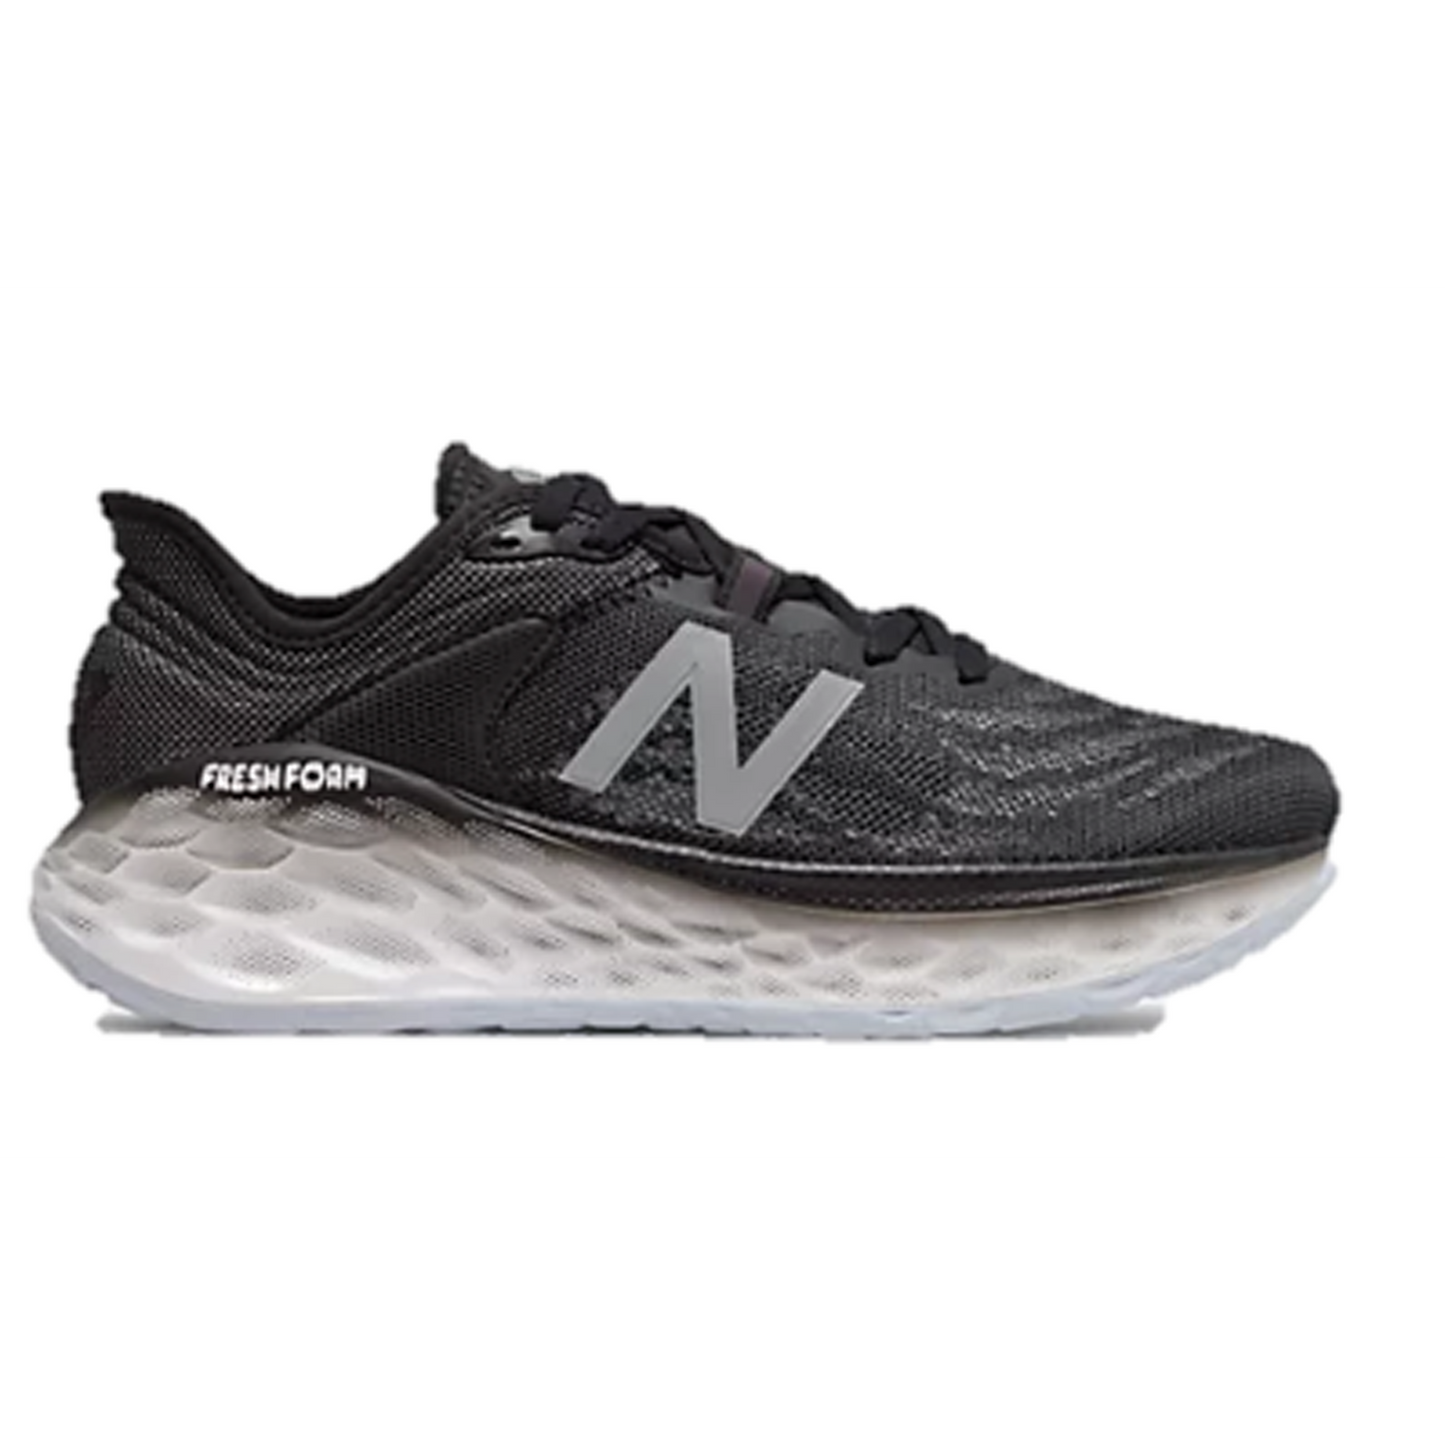 Women's New Balance More V2 running shoe. Upper in colour black with a white fresh foam sole. 